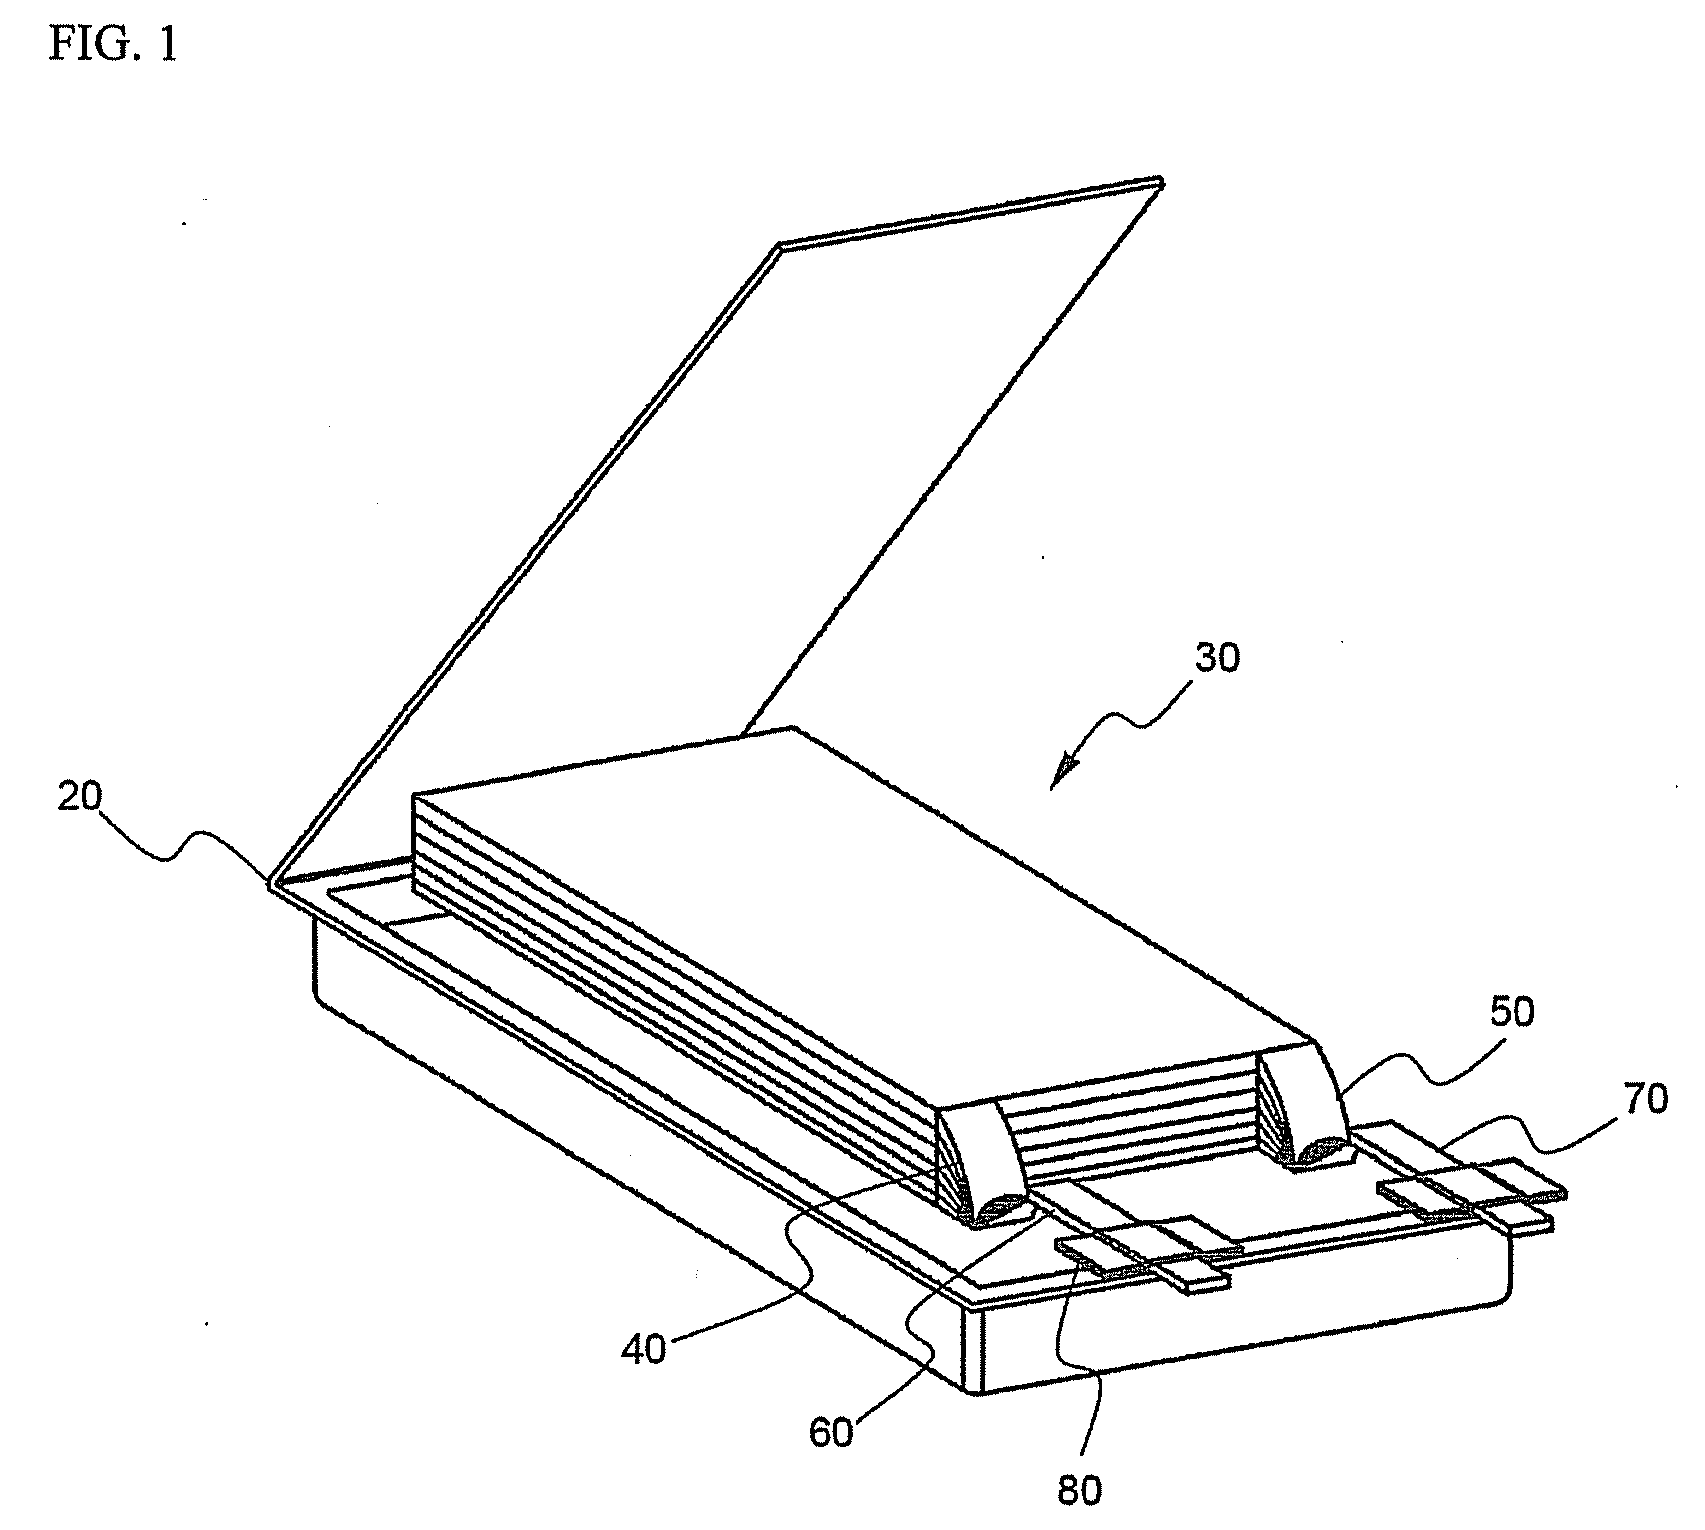 Secondary battery of improved safety